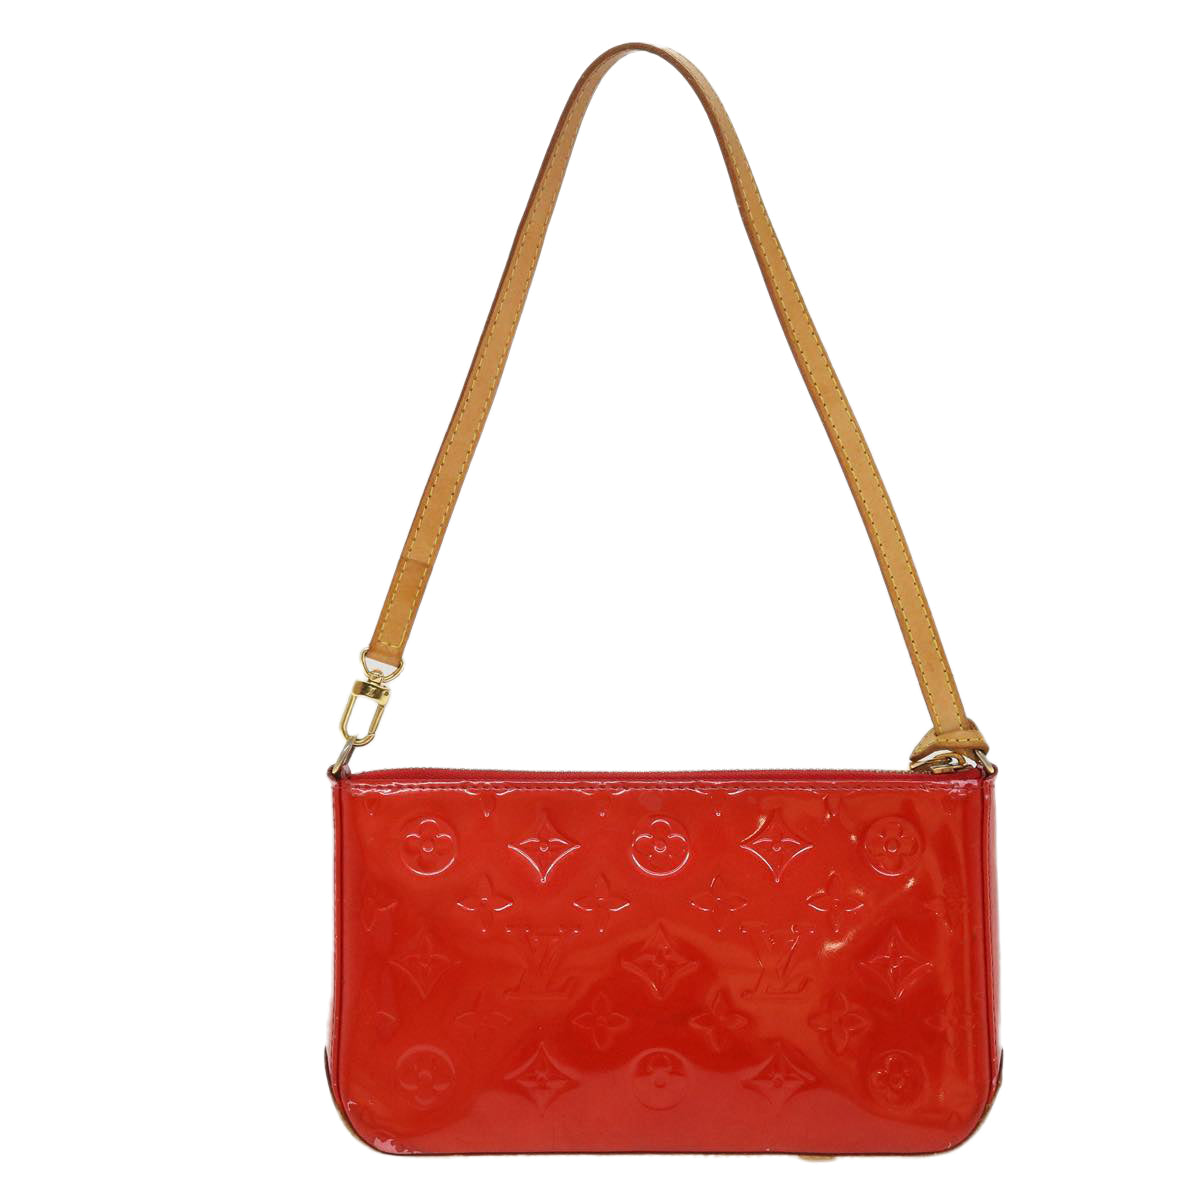 LOUIS VUITTON Monogram Vernis marly square Hand Bag Red LV Auth 37487 - 0